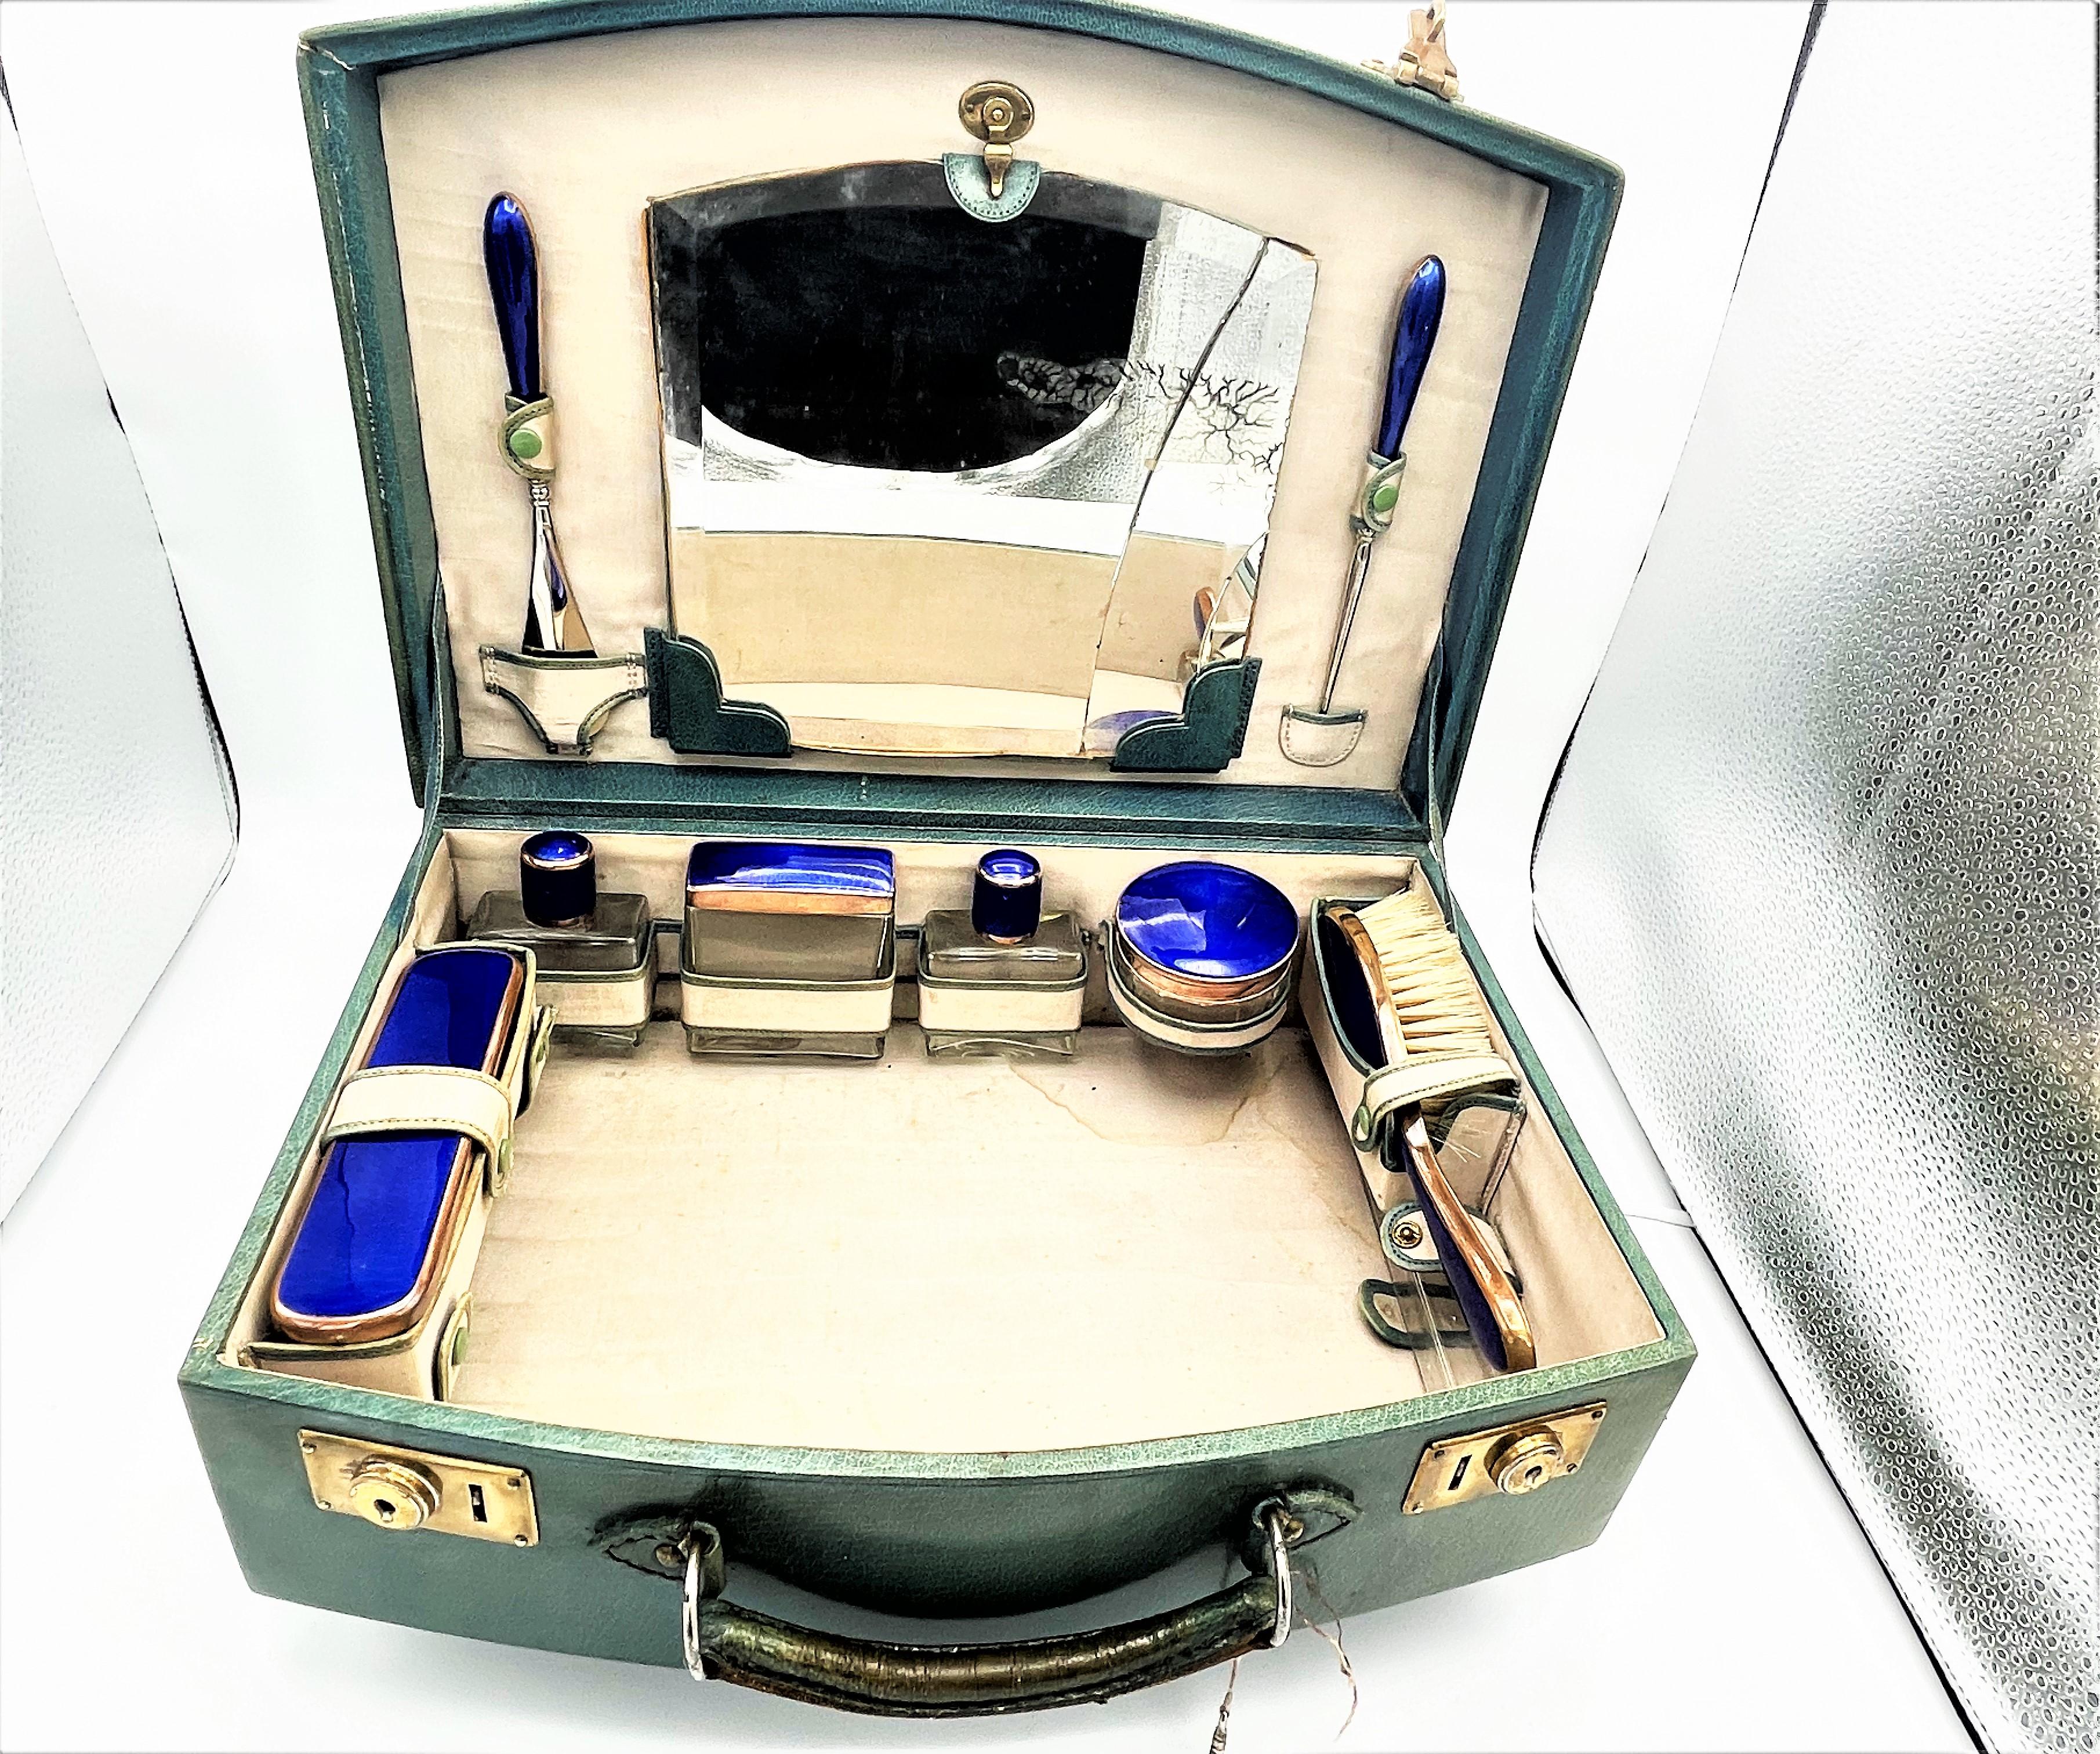 A small original beauty case with many (5) original glass containers, all with blue emailed lids. Also a clothes brush, hairbrush, shoehorn, 2 perfume bottles with a glass stopper, as well as a glass container for the toothbrush .All parts in